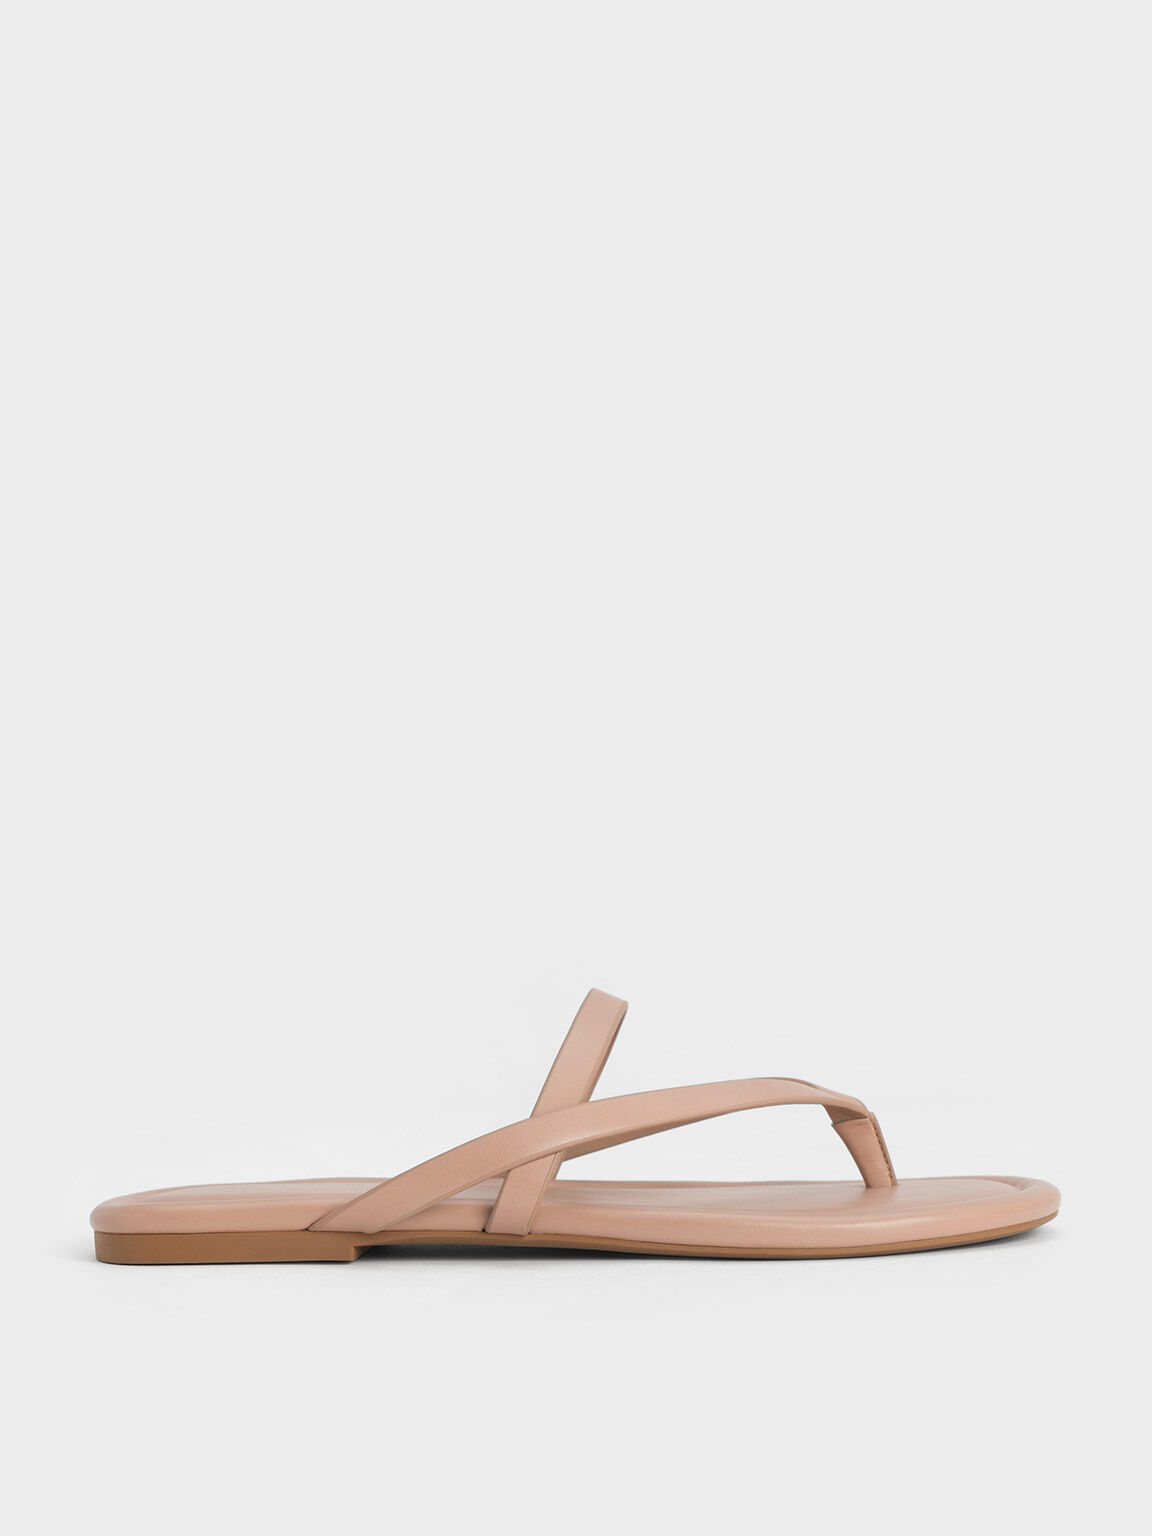 Sandal Strappy Thong, Nude, hi-res